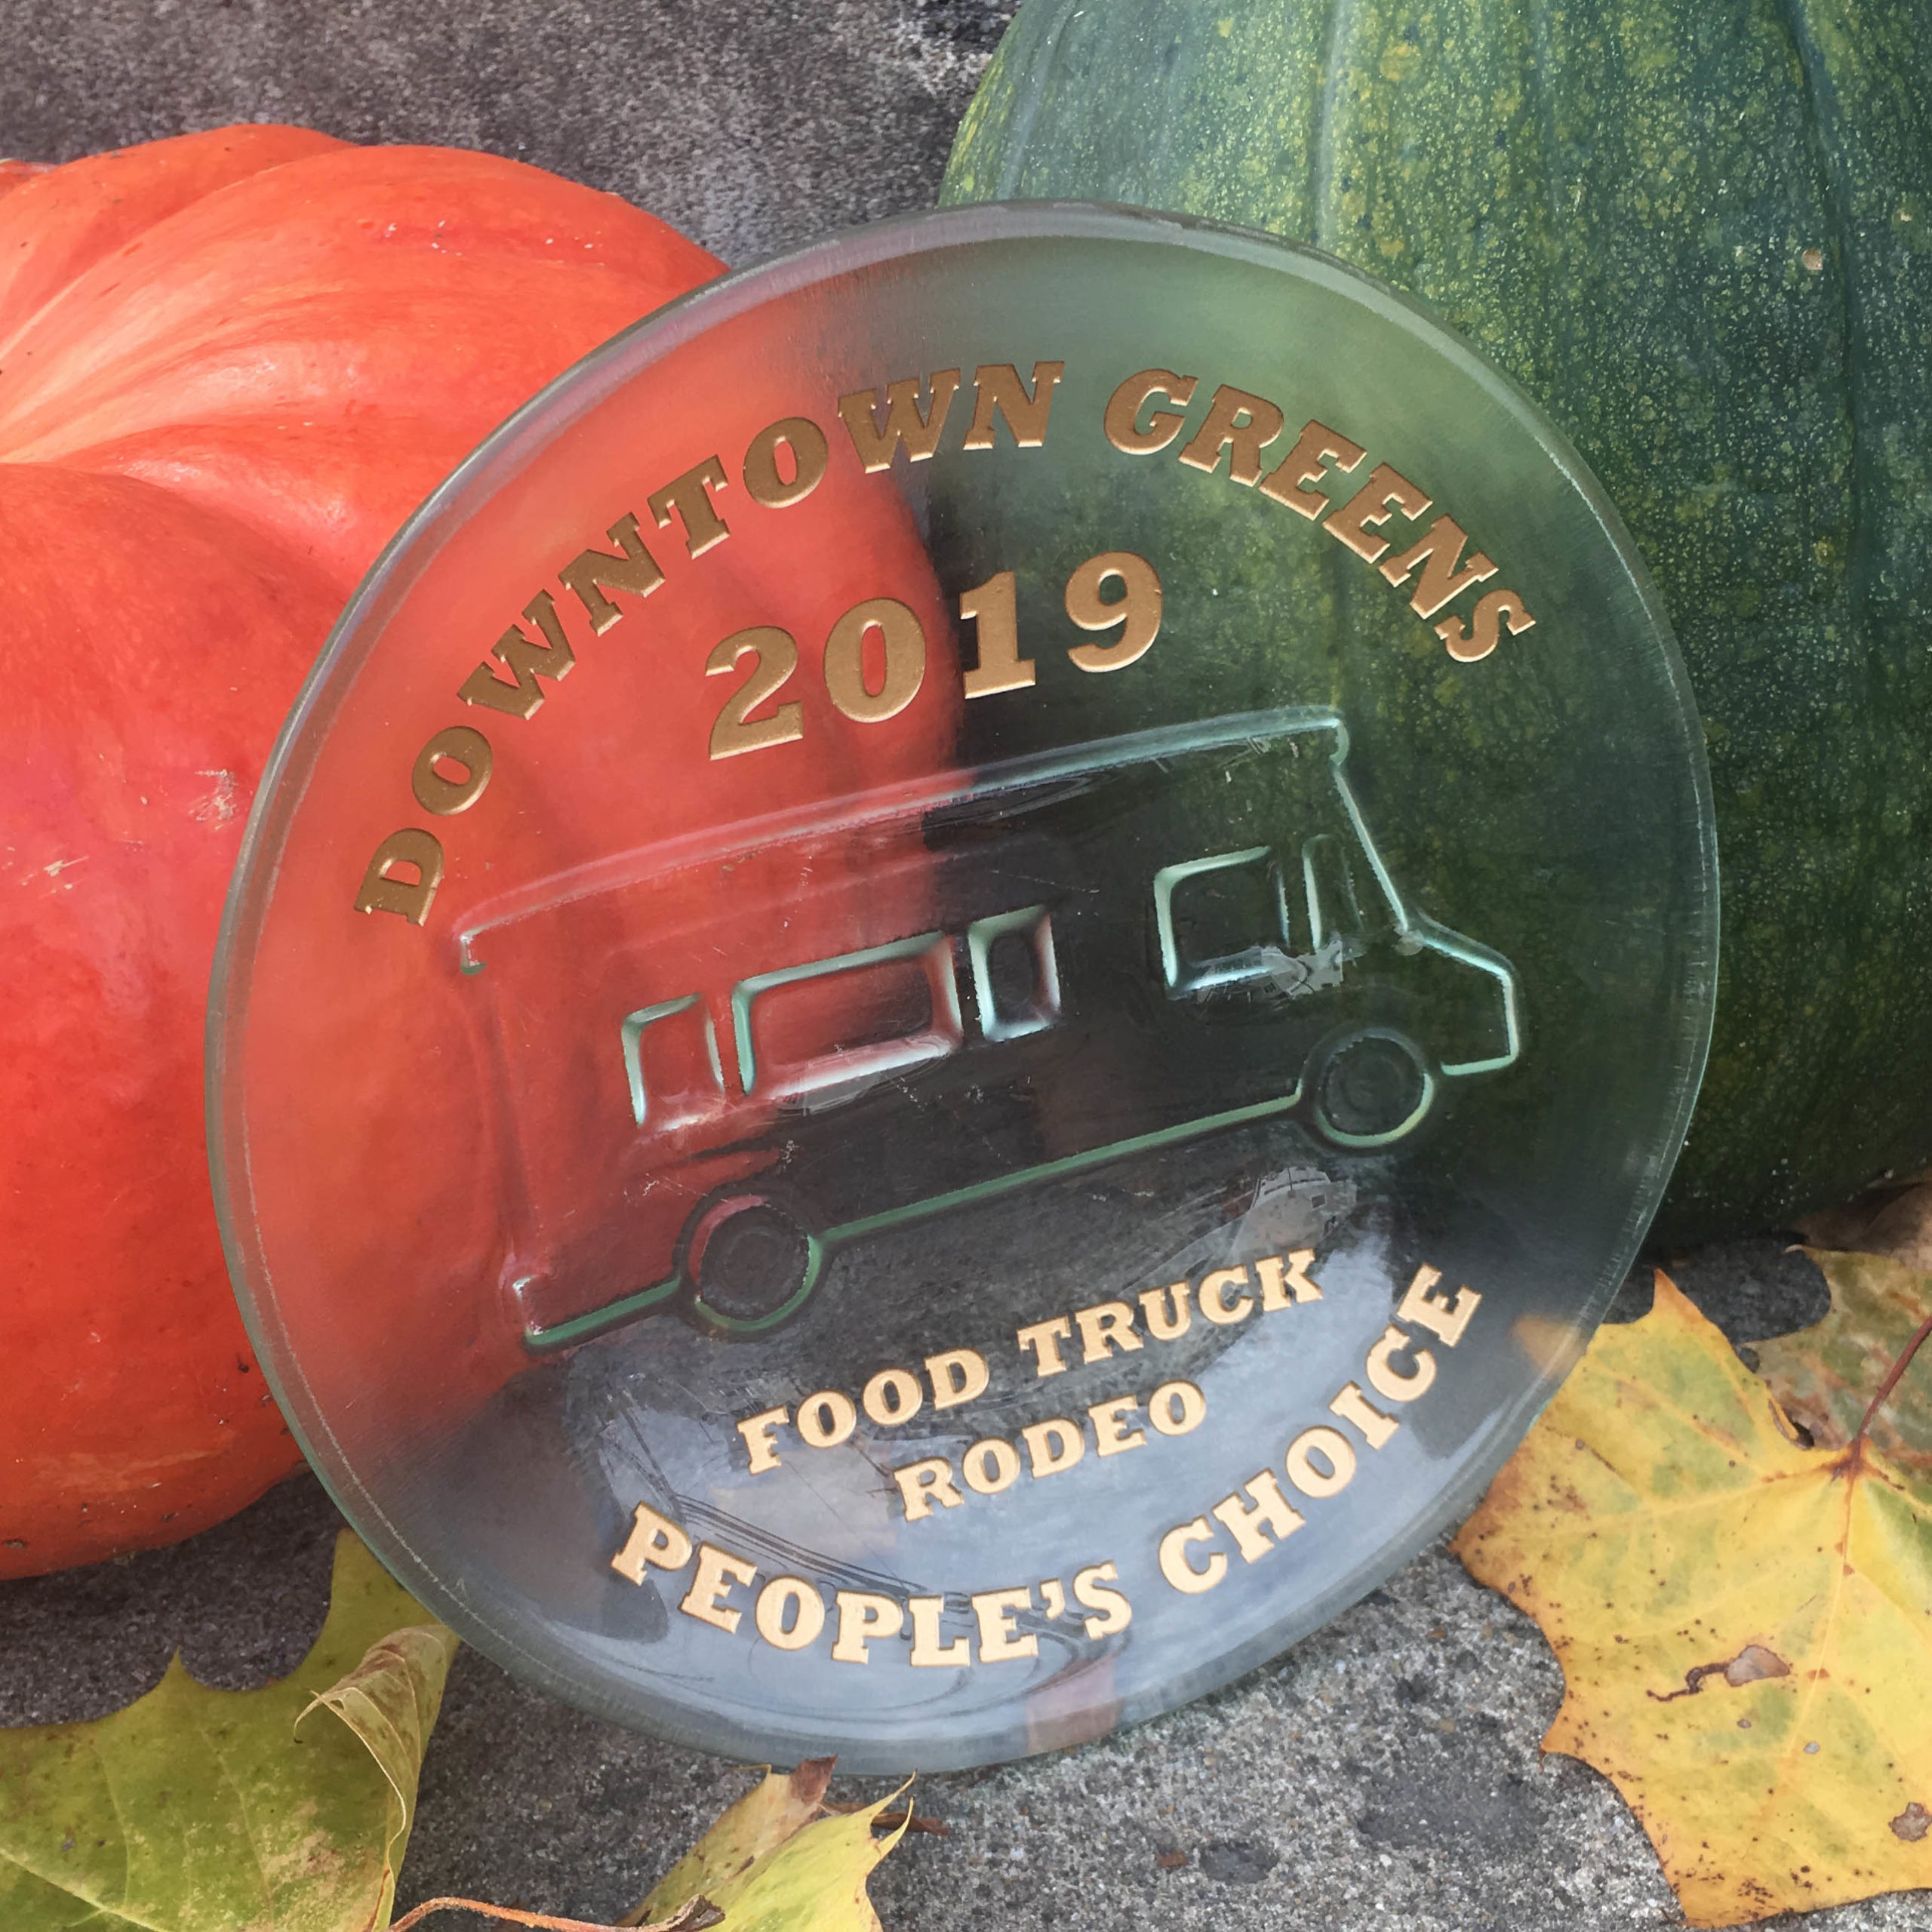 Glass dish with embossed design of a food truck with the text "food truck rodeo people's choice award, 2019"